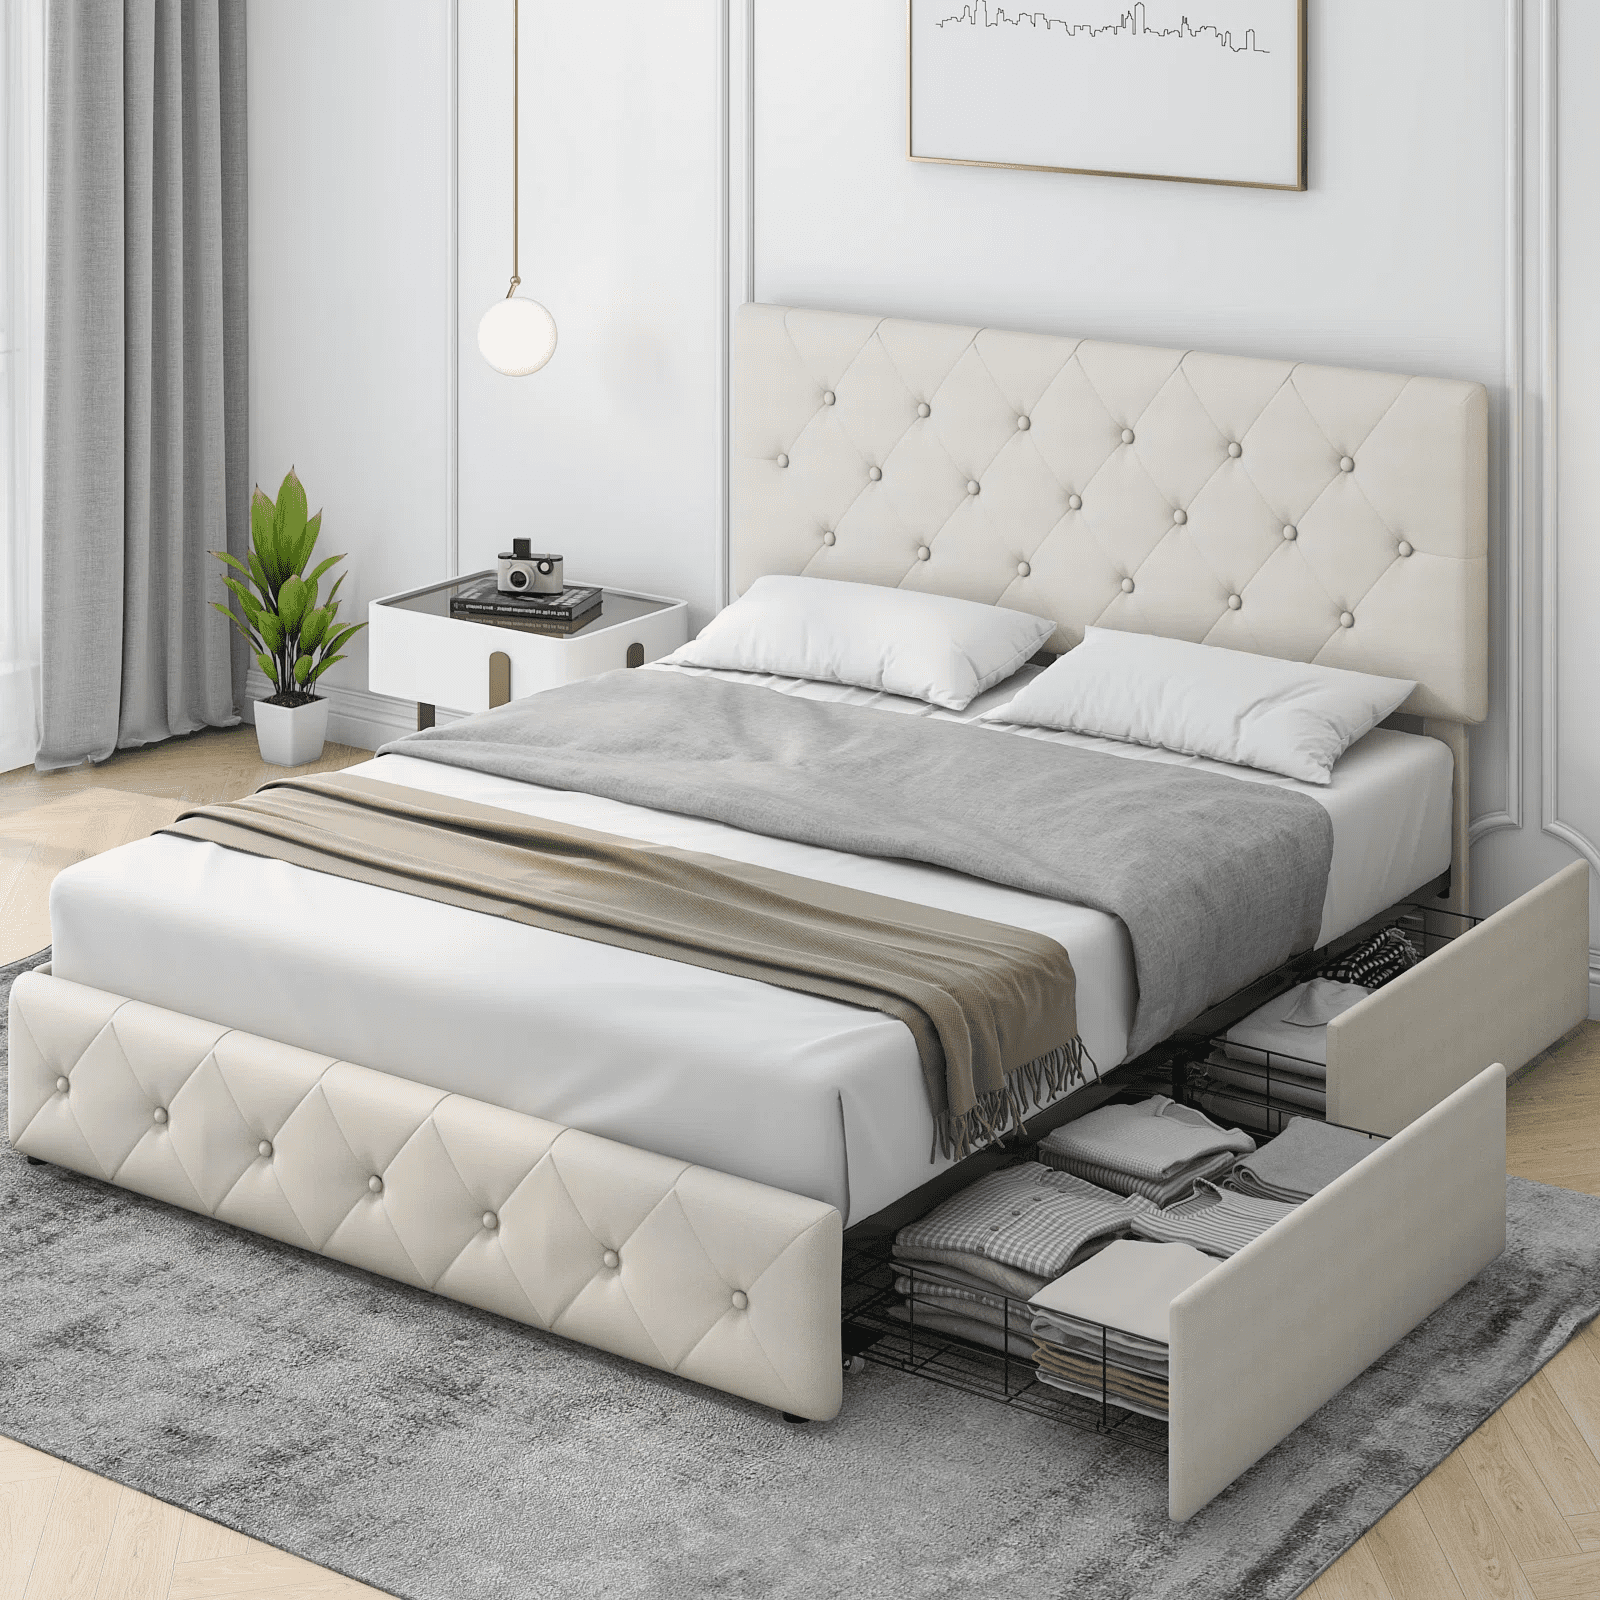 Homfa Full Size 4 Storage Drawers Bed Frame, Square Tufted Upholstered Platform  Bed with Adjustable Headboard, Off-white 